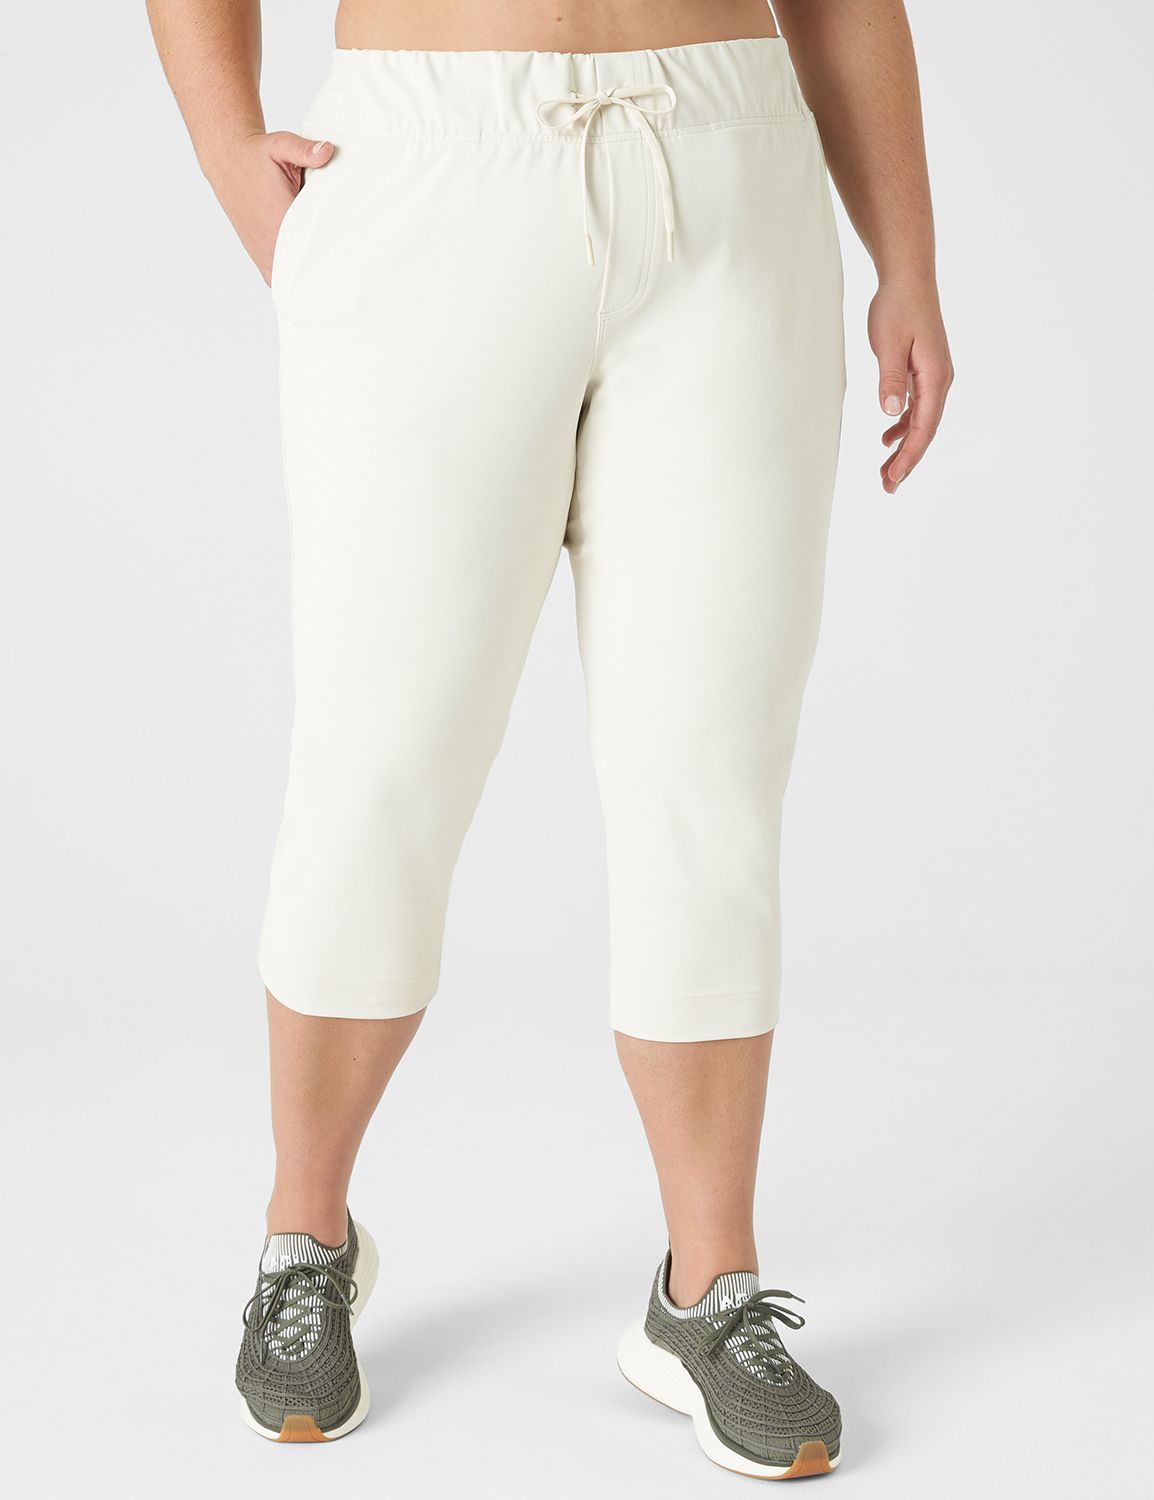 Sexy Basics Women's 3 Pack Drawstring Pants  French Terry Cotton Capri  Bottoms at  Women's Clothing store